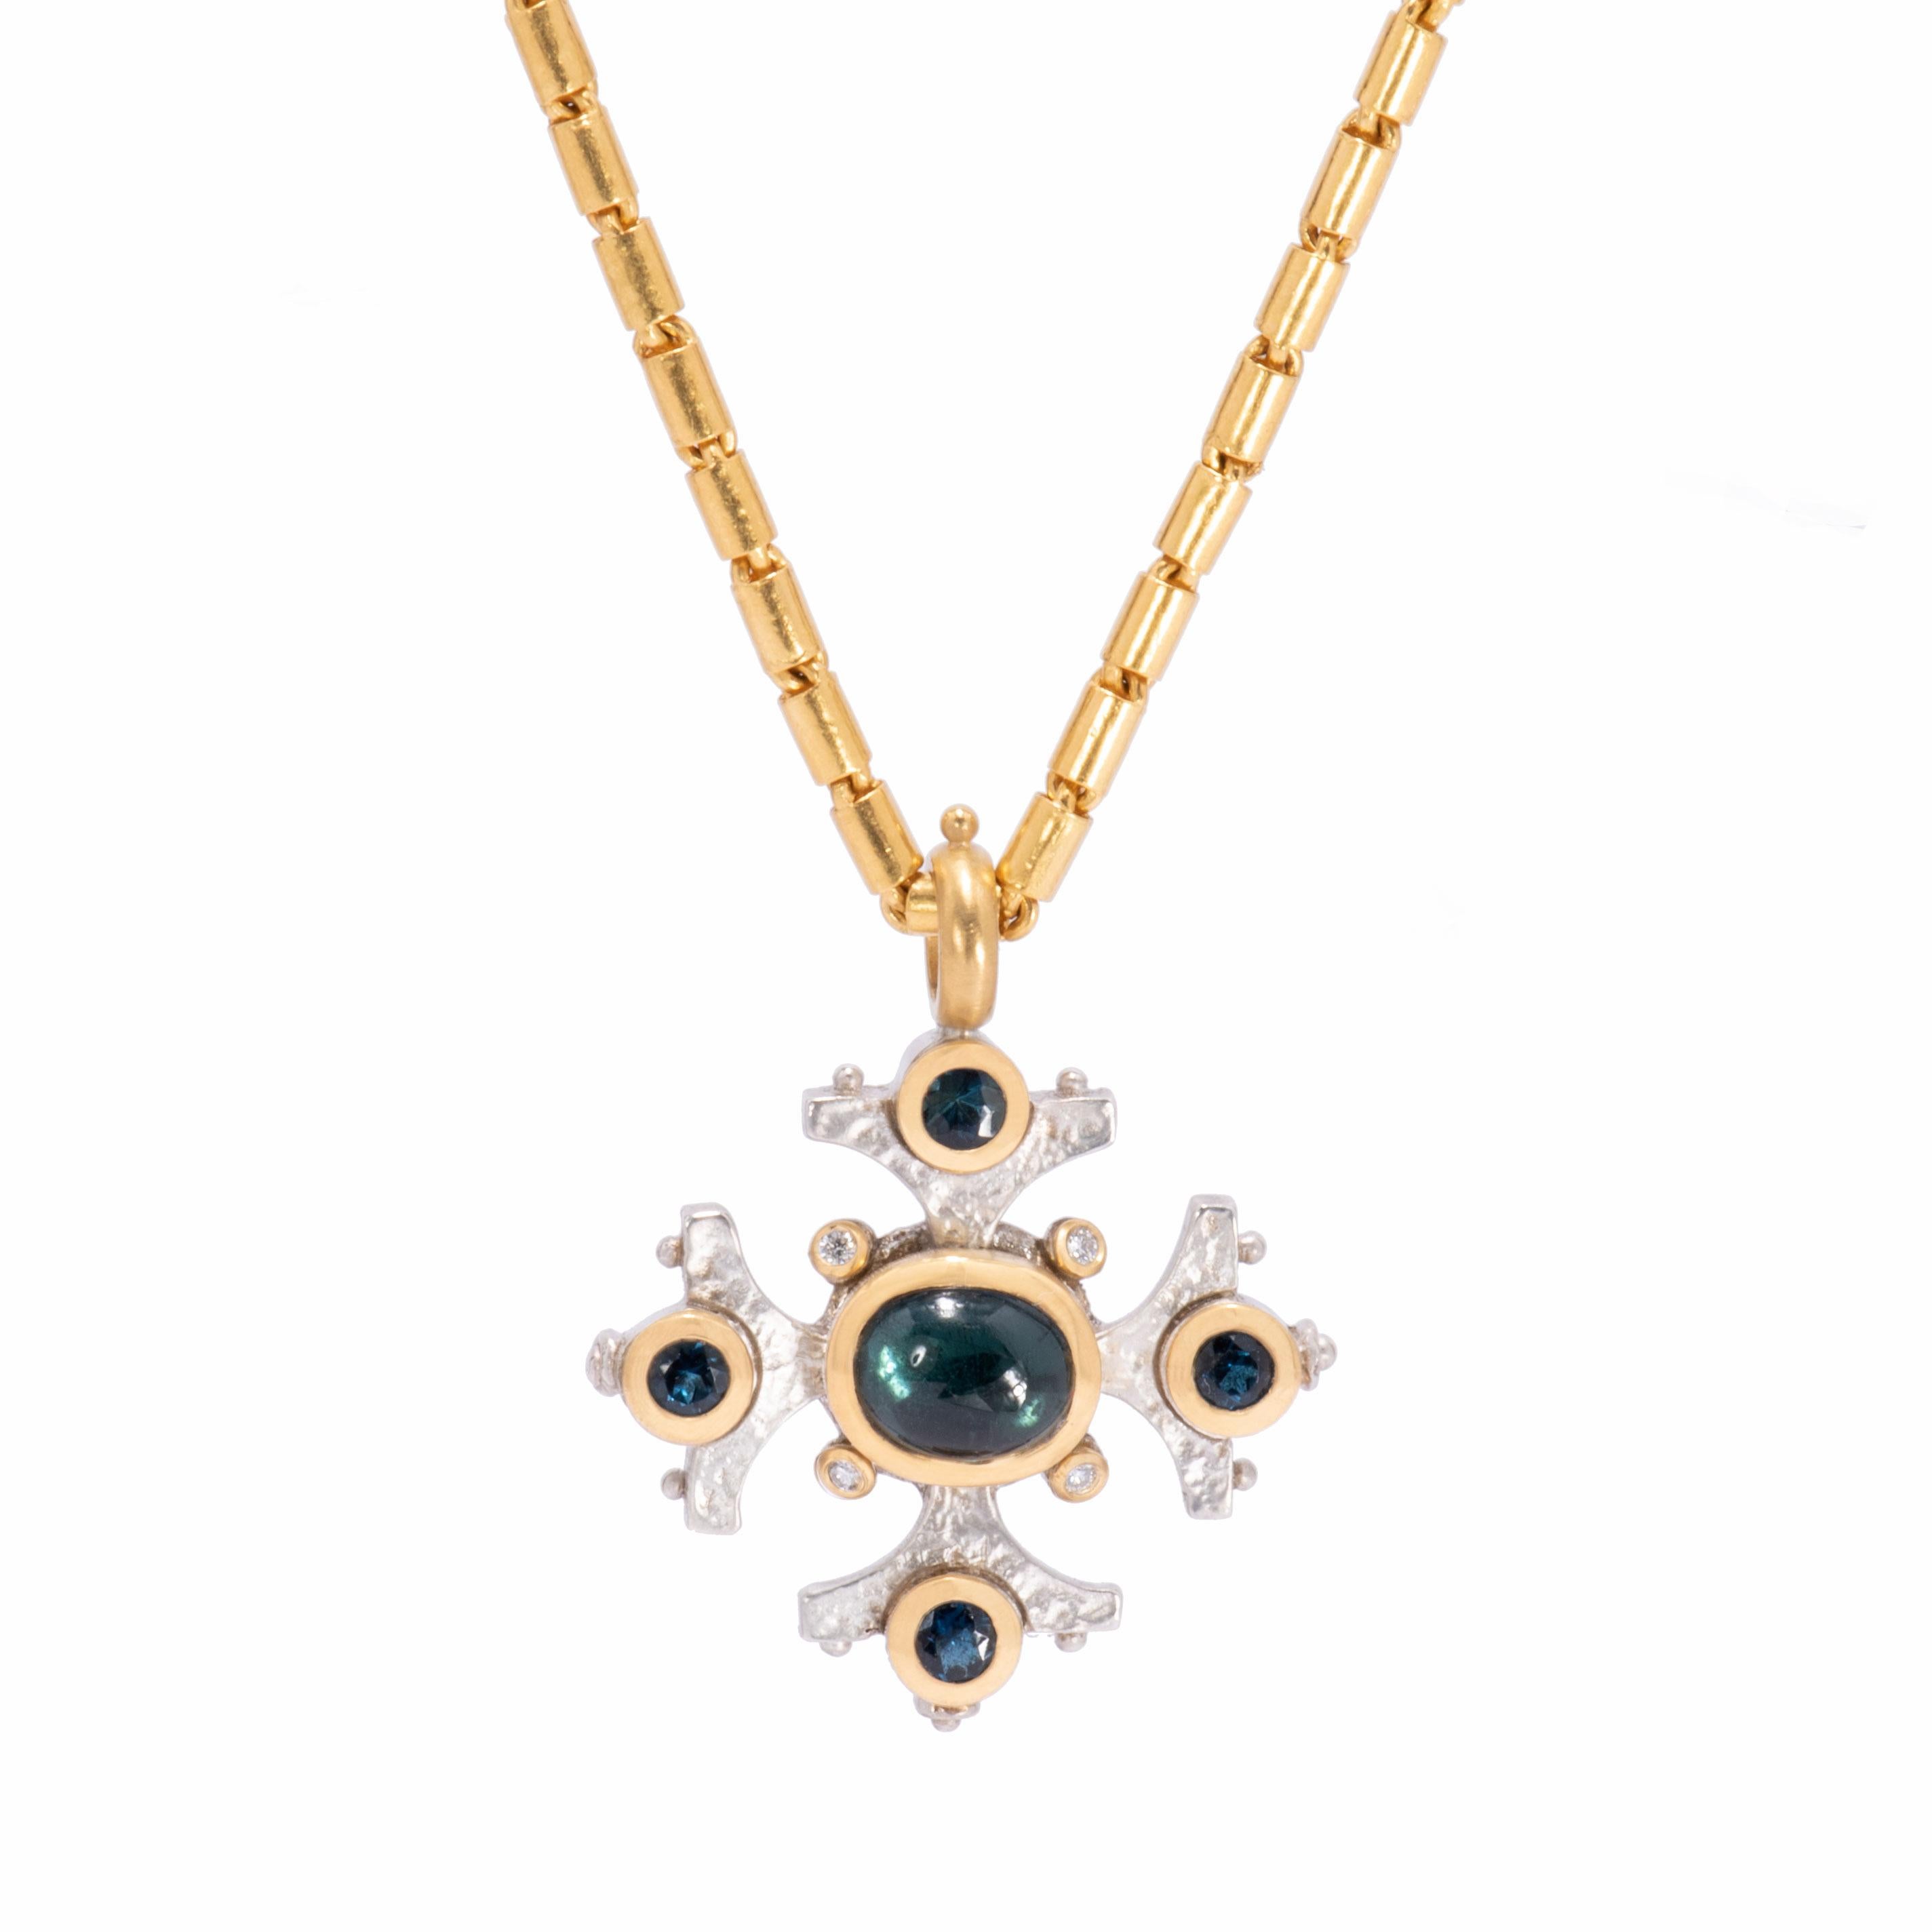 The velvety richness of blue green indicolite tourmaline speaks volumes in our mixed metal Maltese Cross Pendant. The cabochon center stone 3.39 cts. and faceted satellite stones .89 ctw. are bezel set in 22kt gold for maximum contrast against a